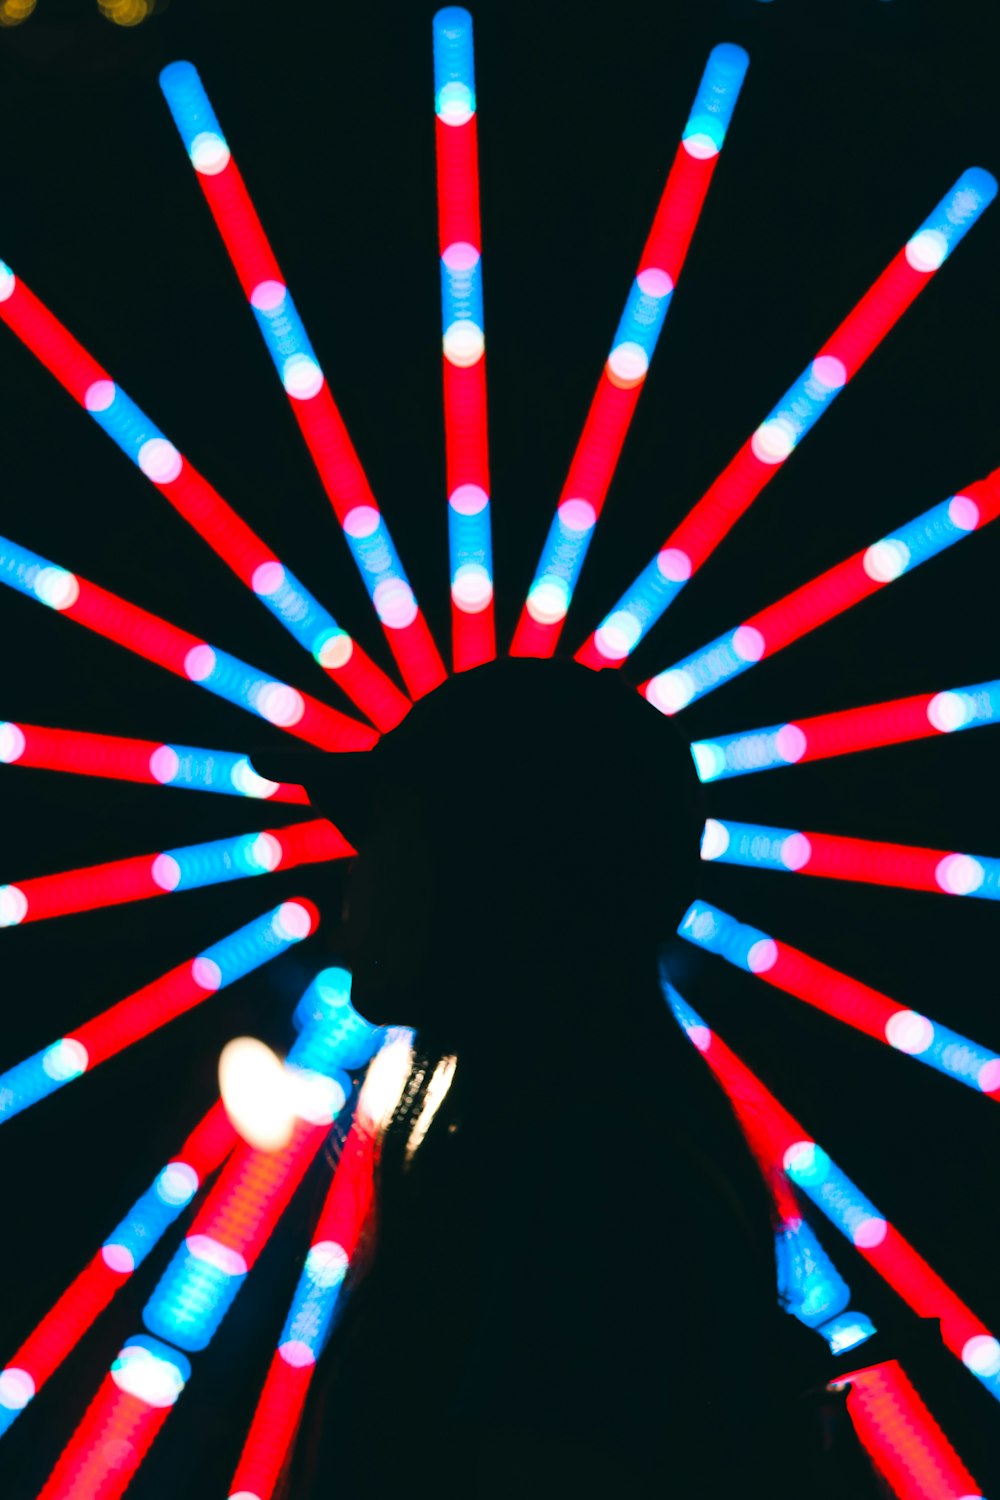 a person standing in front of a ferris wheel with red, white and blue lights